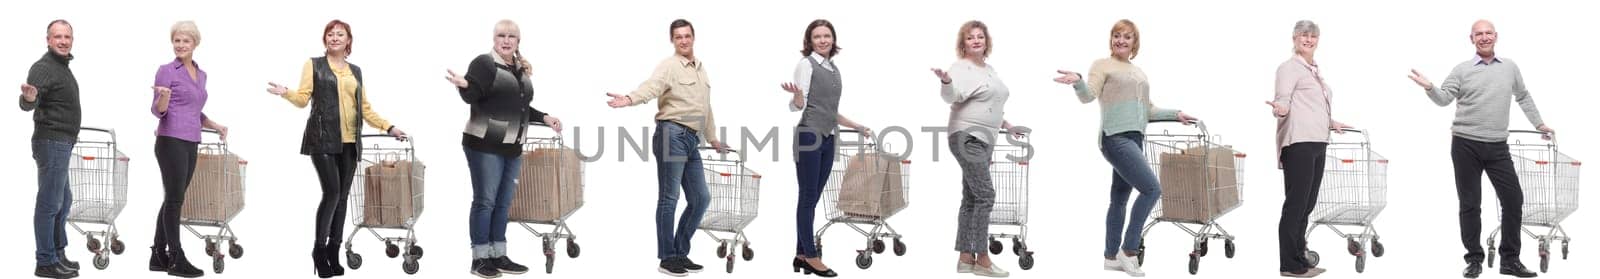 group of people with cart and outstretched hand by asdf